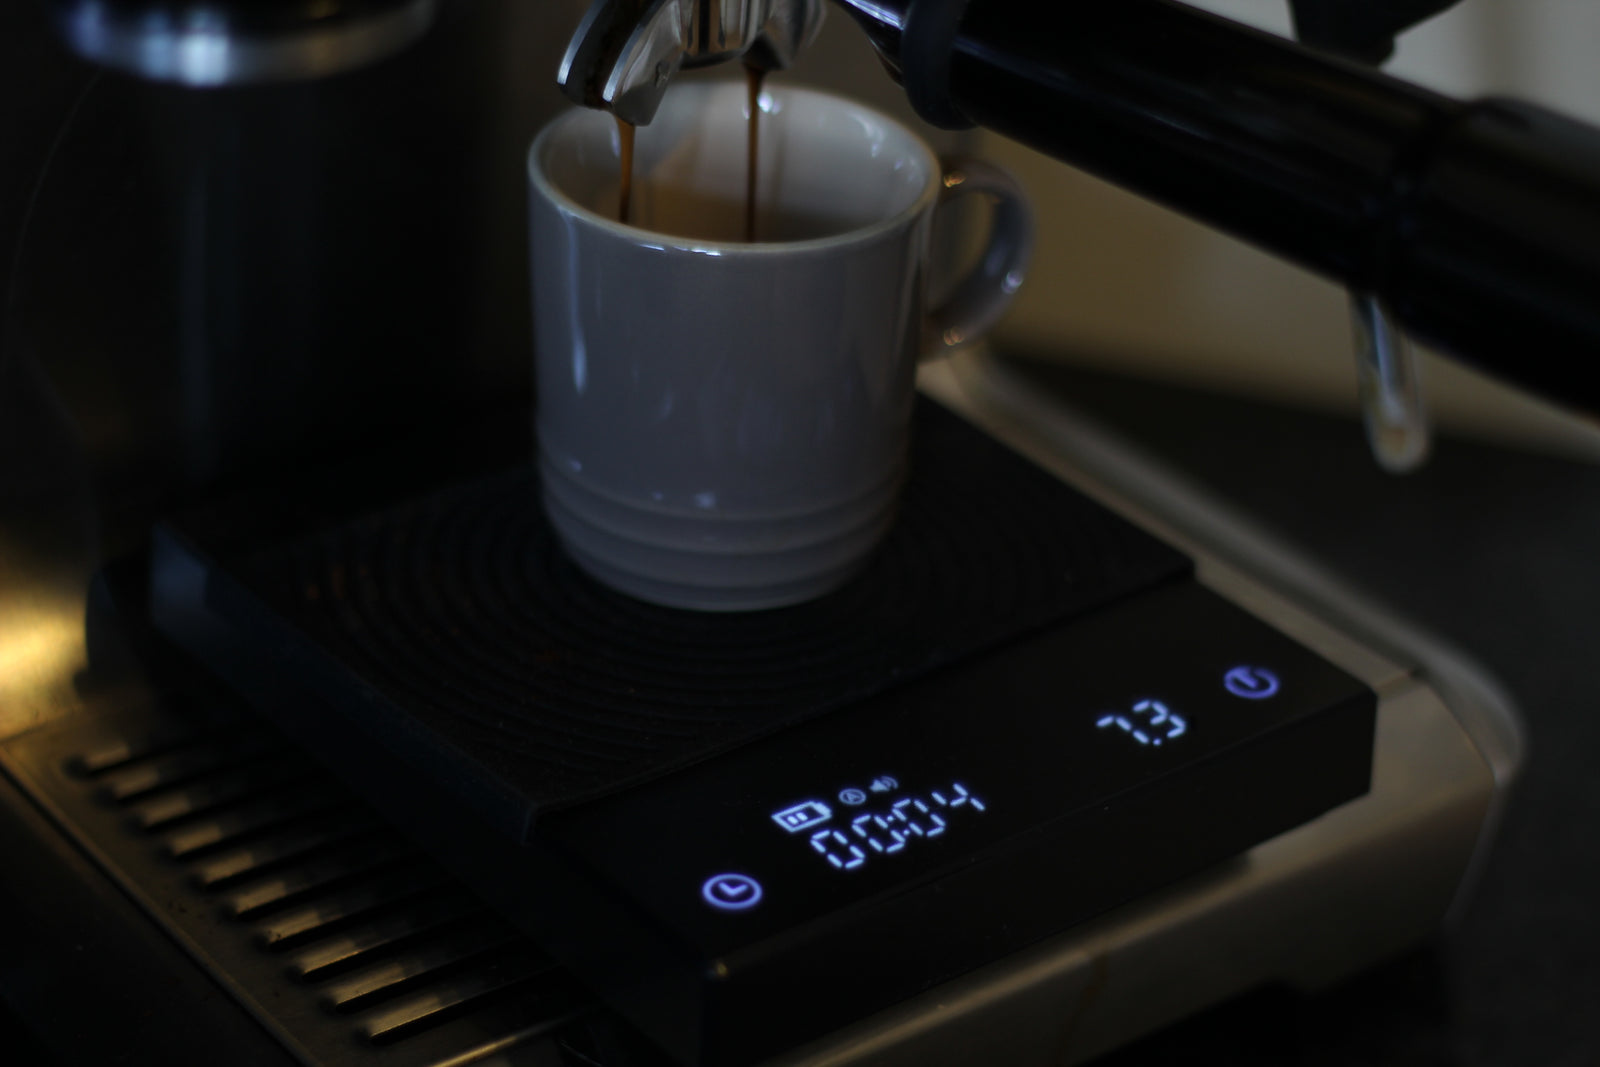 How do I use a coffee scale when making espresso at home